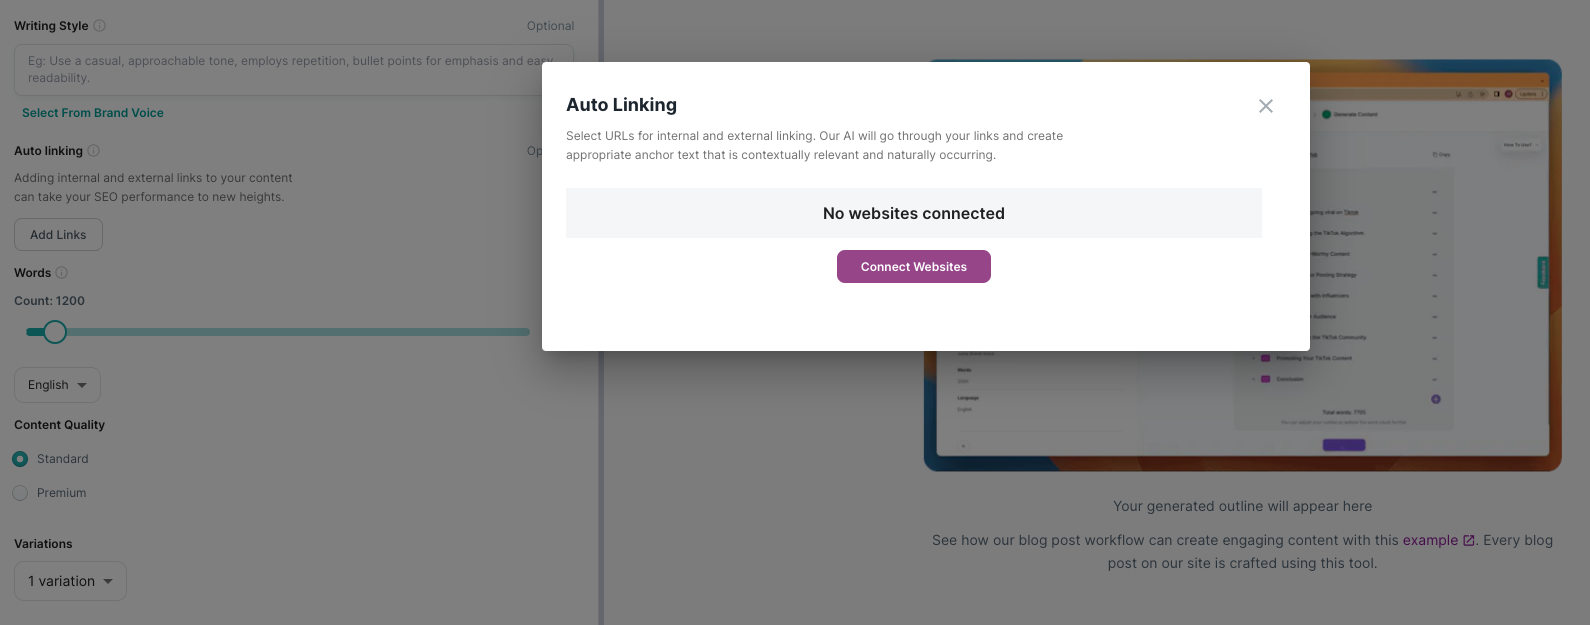 Access the Auto-Linking Feature within the Blog Post Workflow